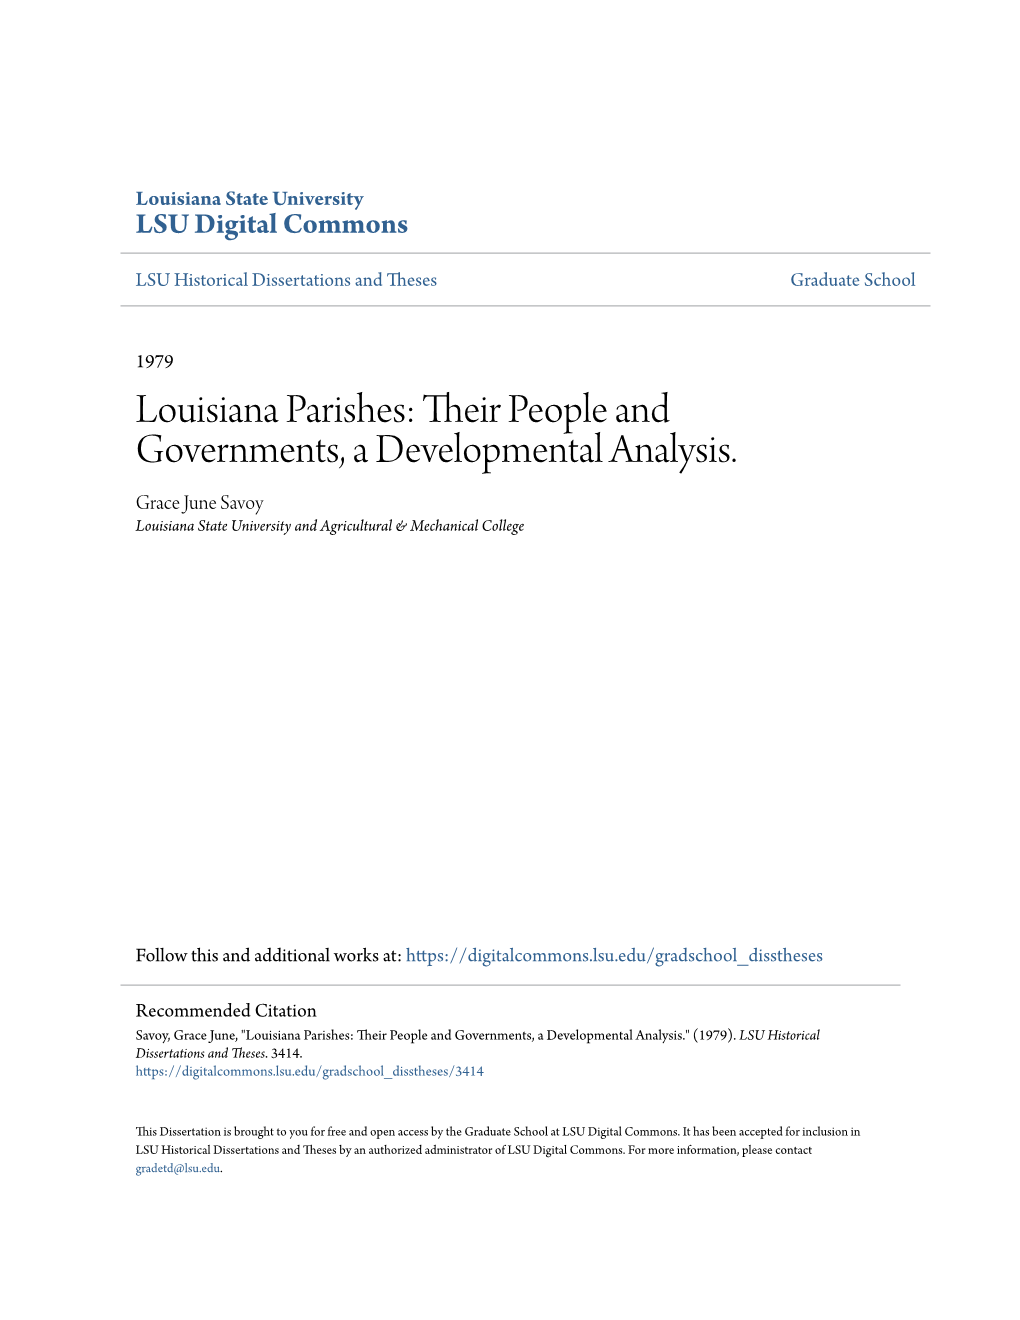 Their People and Governments, a Developmental Analysis